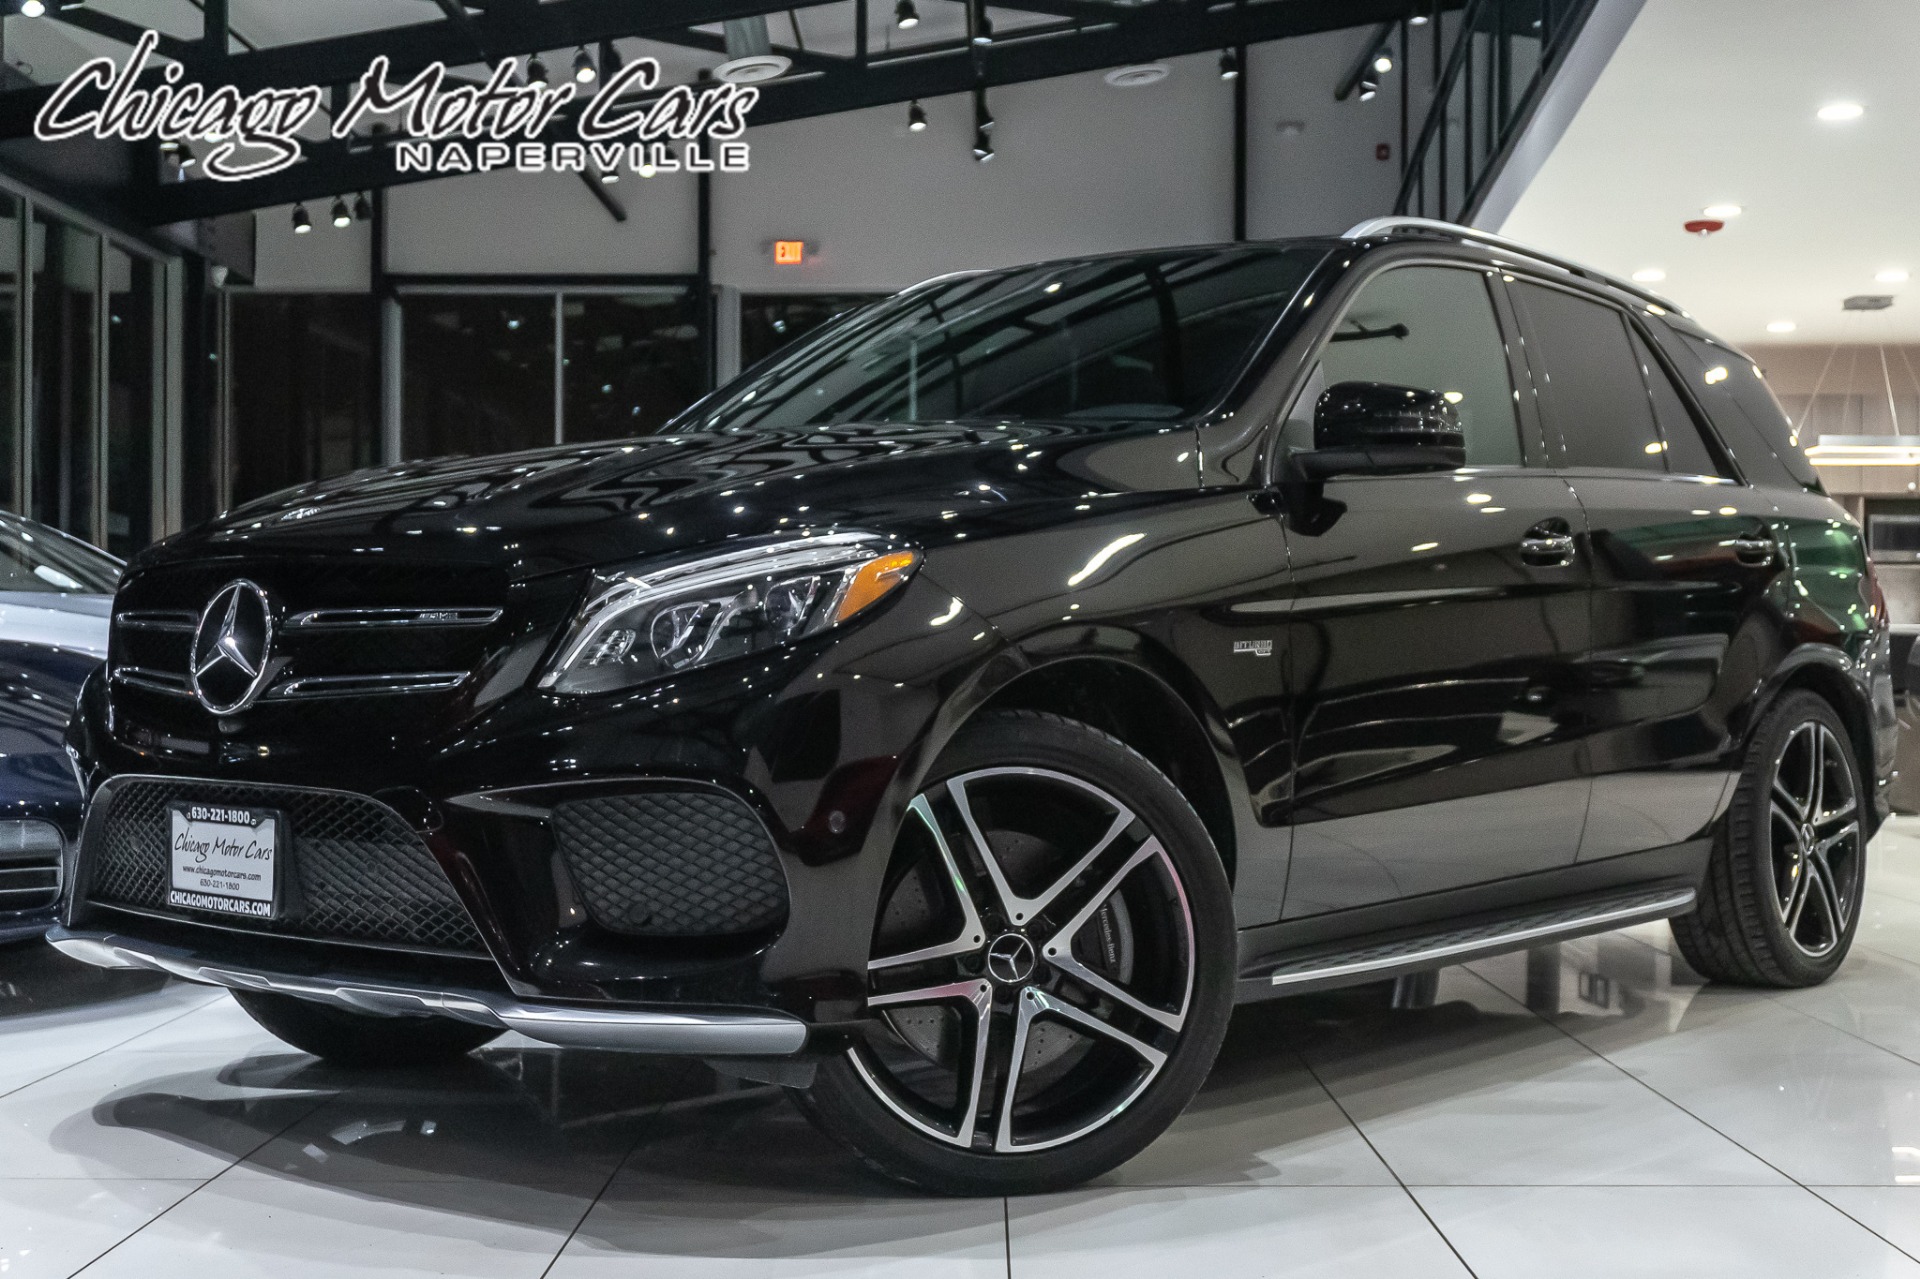 Used 18 Mercedes Benz Gle43 Amg Suv P3 Pkg For Sale Special Pricing Chicago Motor Cars Stock